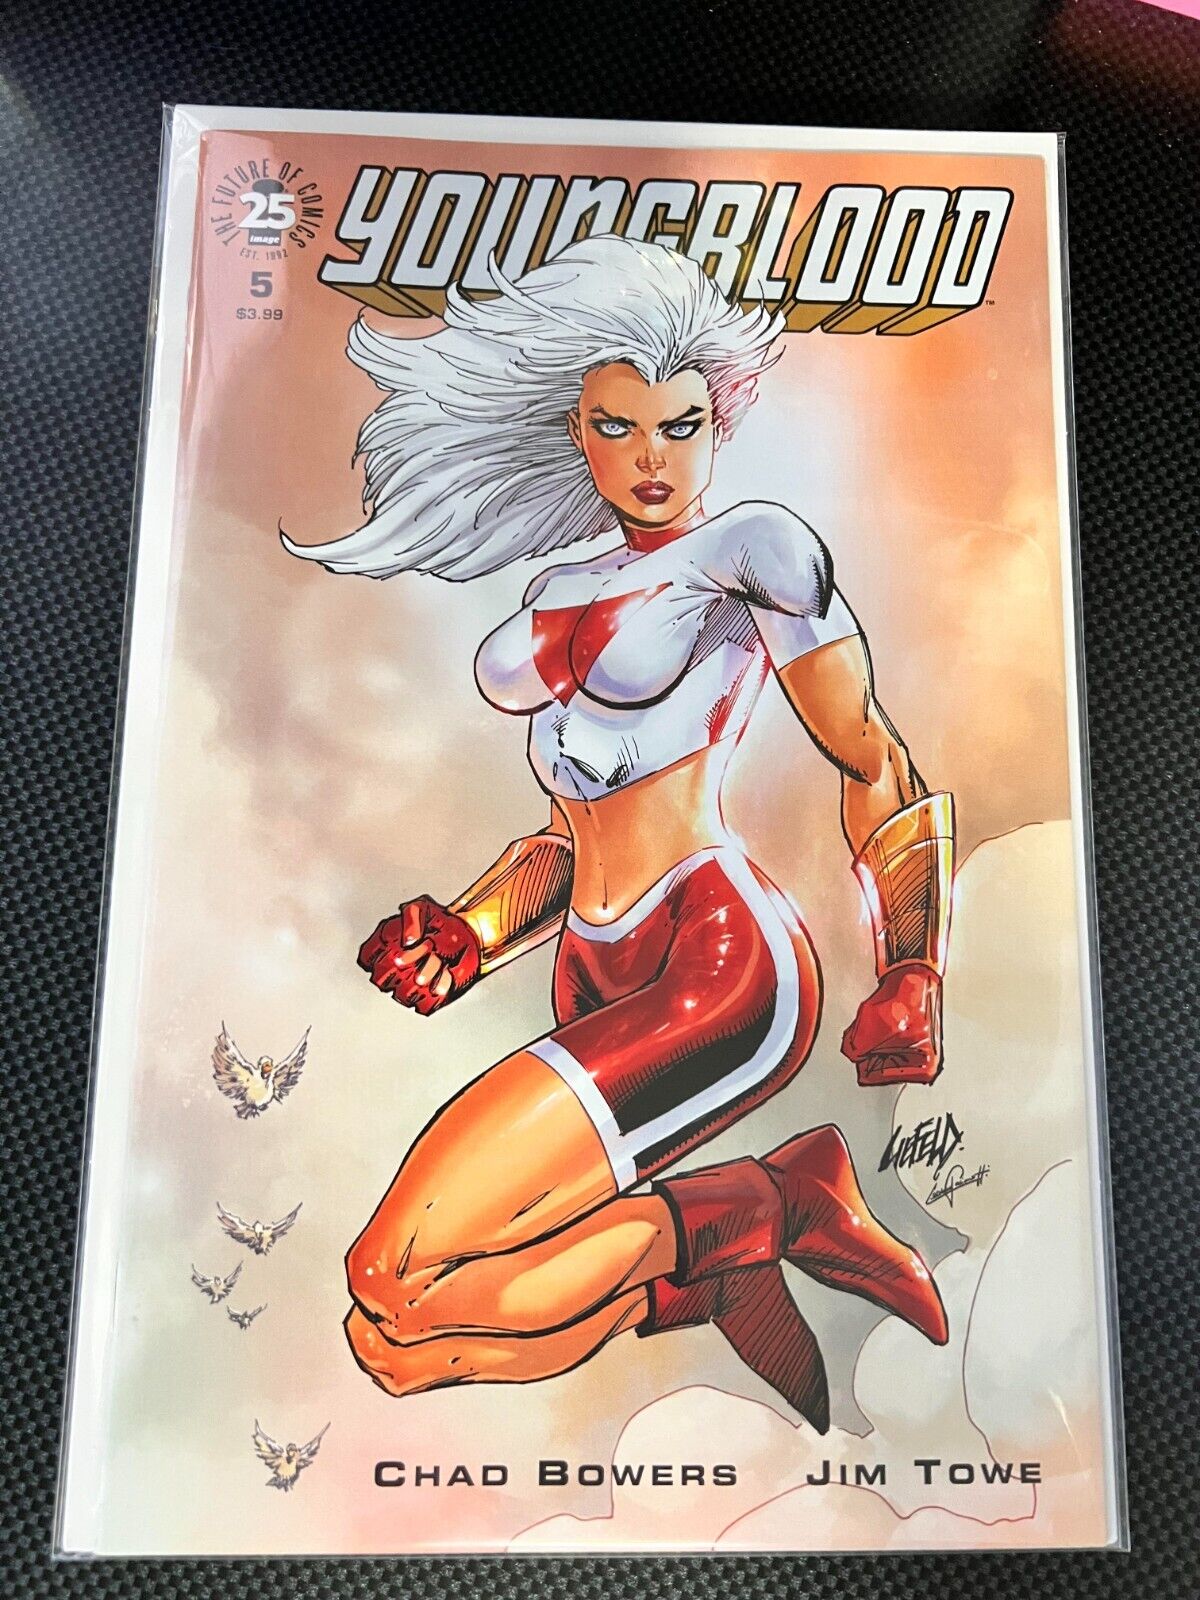 Youngblood #5 Rob Liefeld Cover B Variant Image Comics 2017 Bowers & Towe NEW